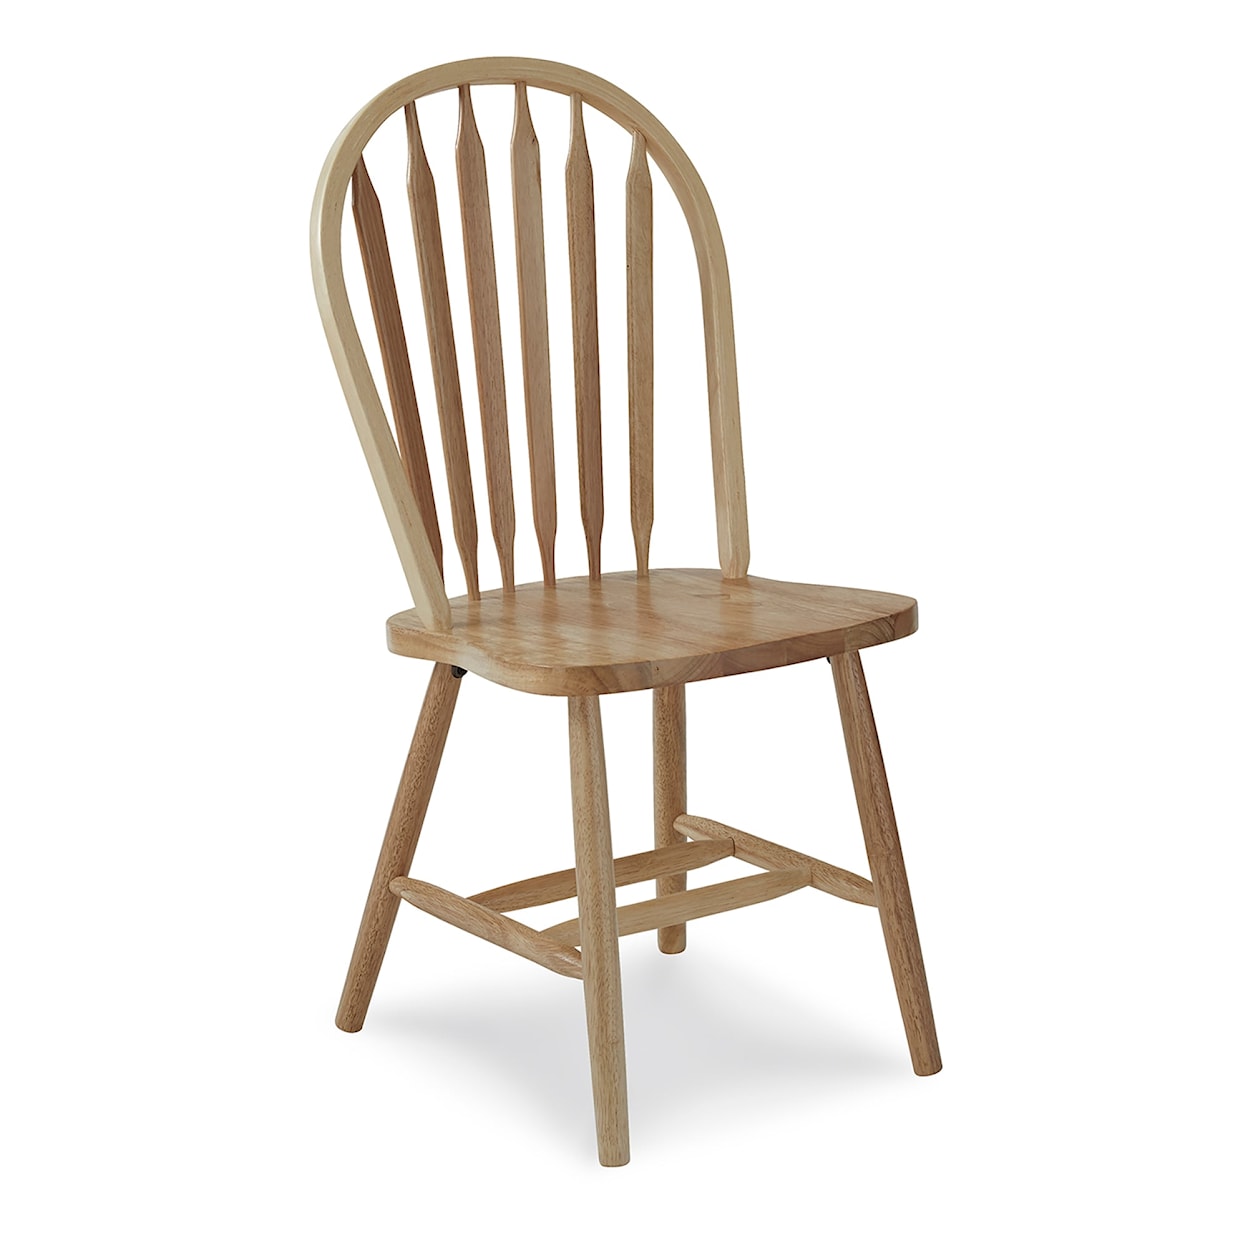 John Thomas Dining Essentials Windsor Arrowback Chair in Natural